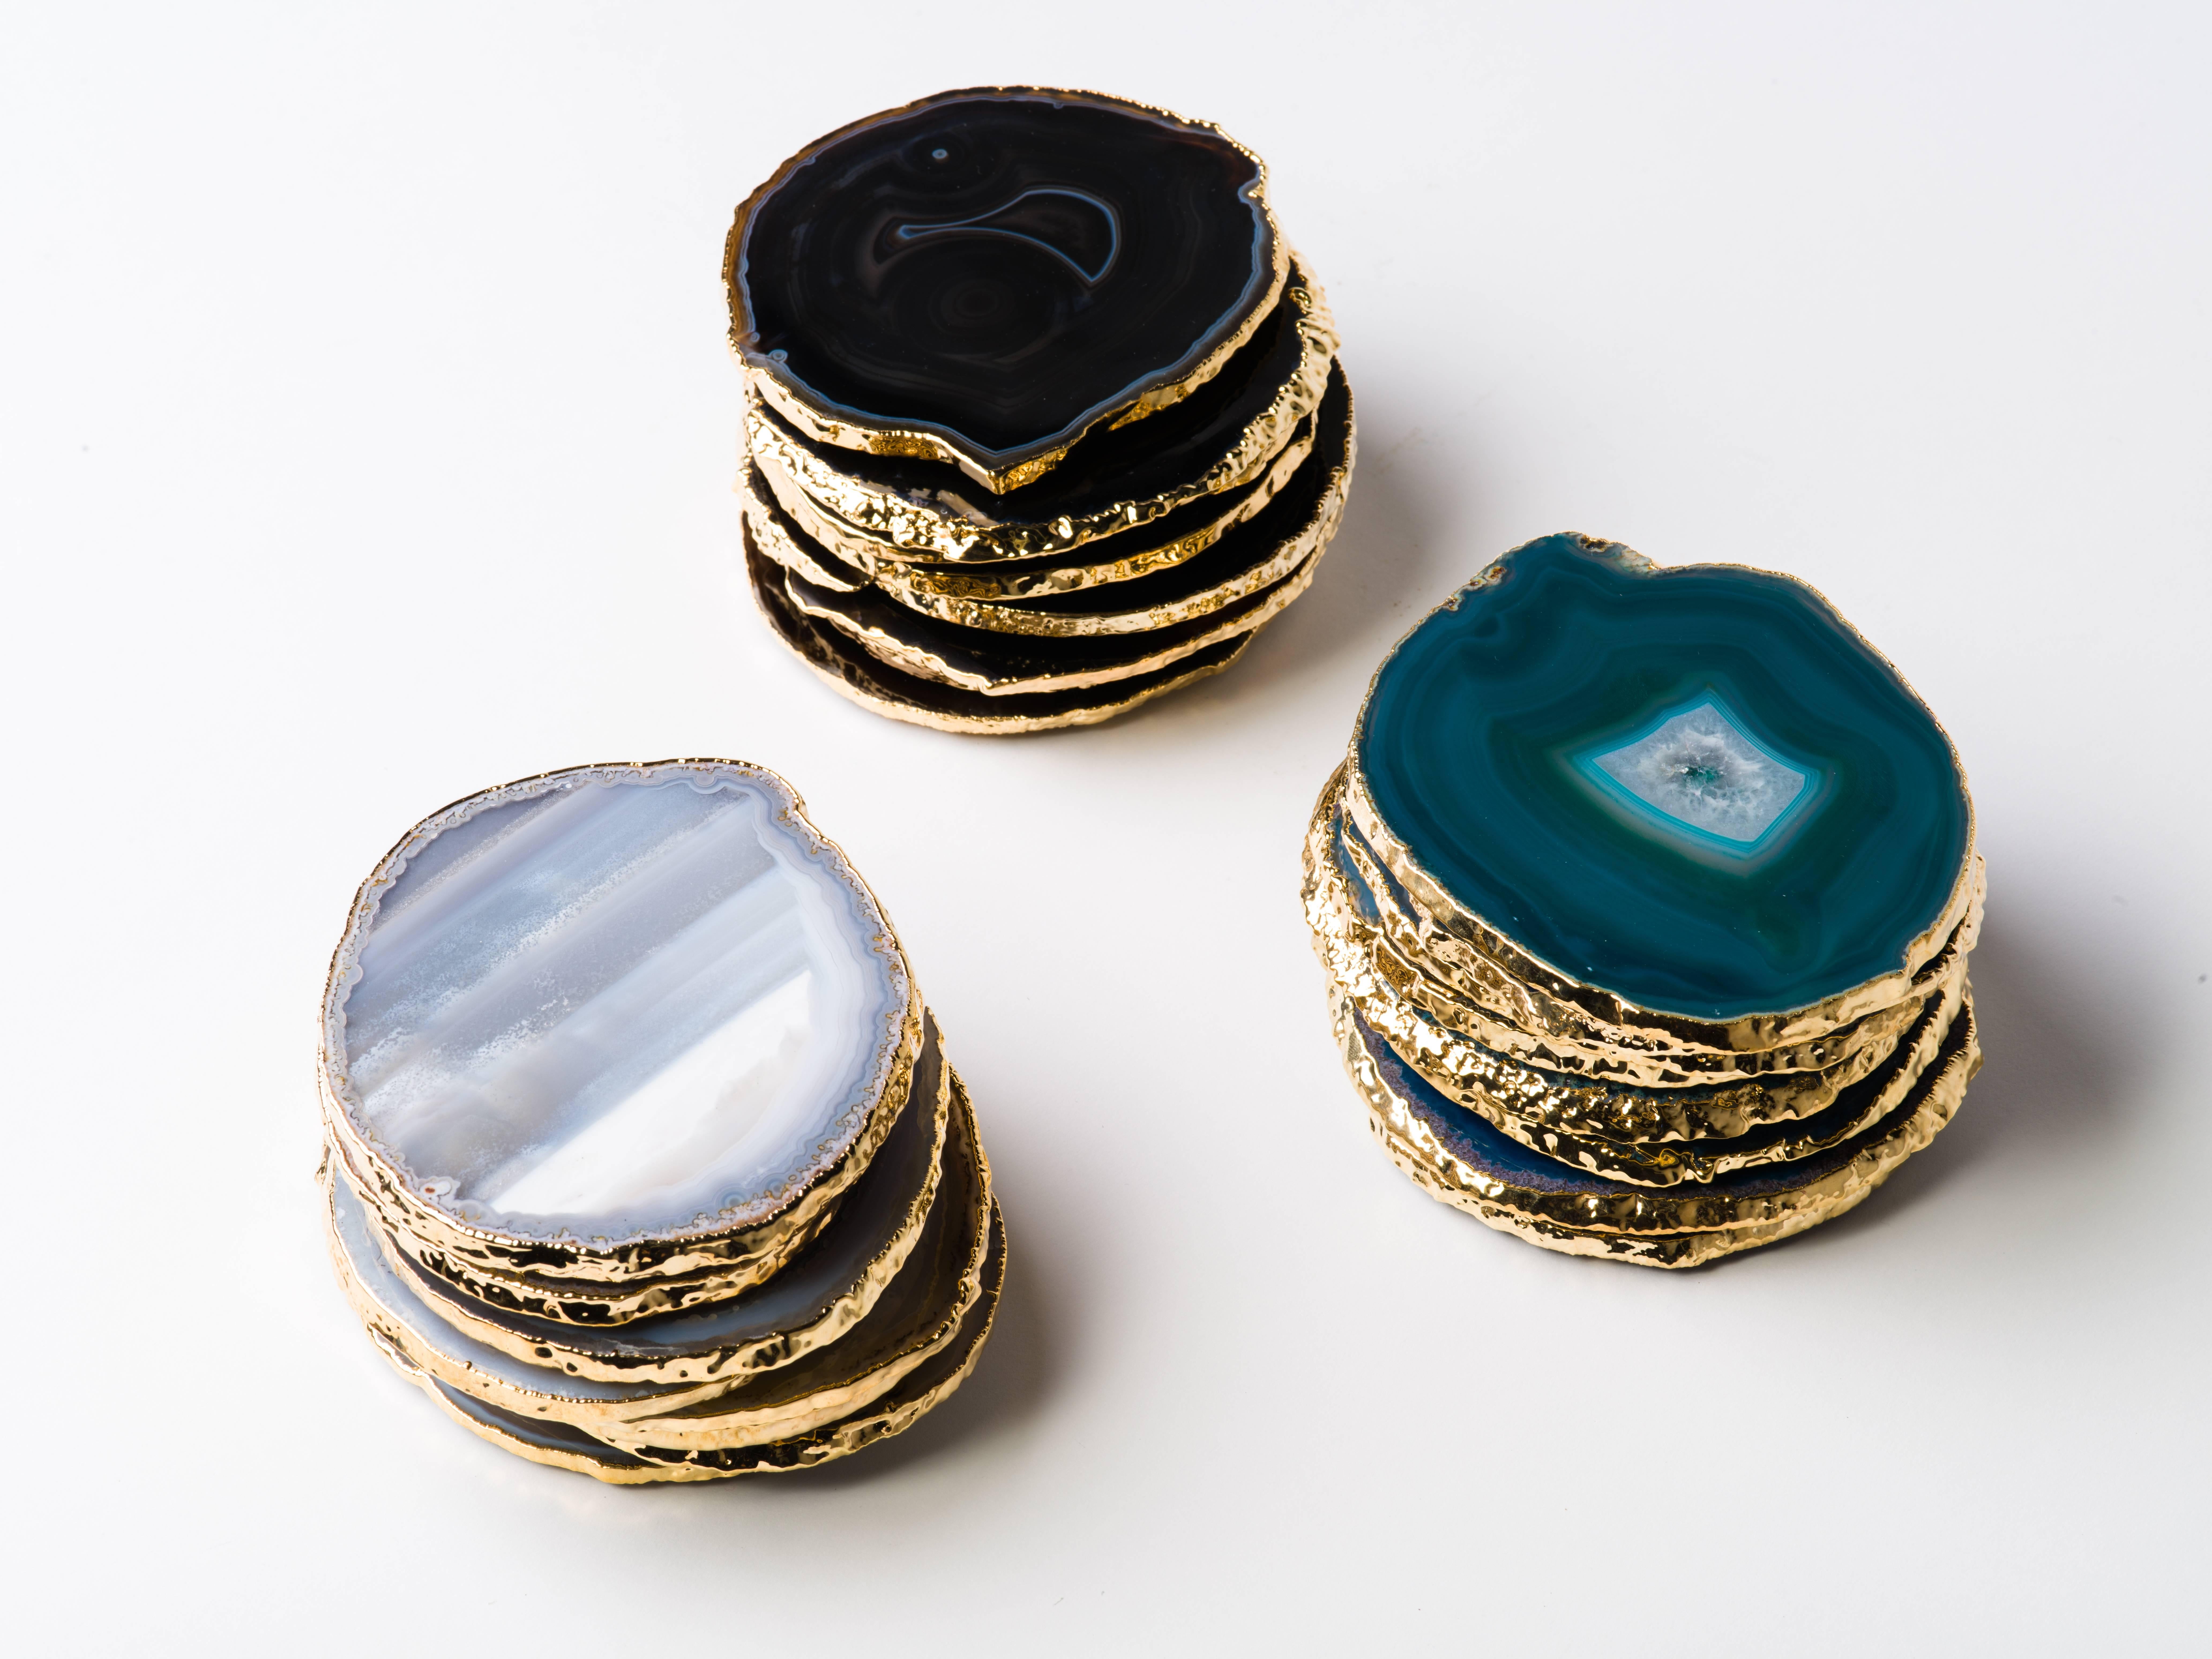 Brazilian Natural Agate and Crystal Coasters in Teal with 24-Karat Gold Trim, Set/8 For Sale